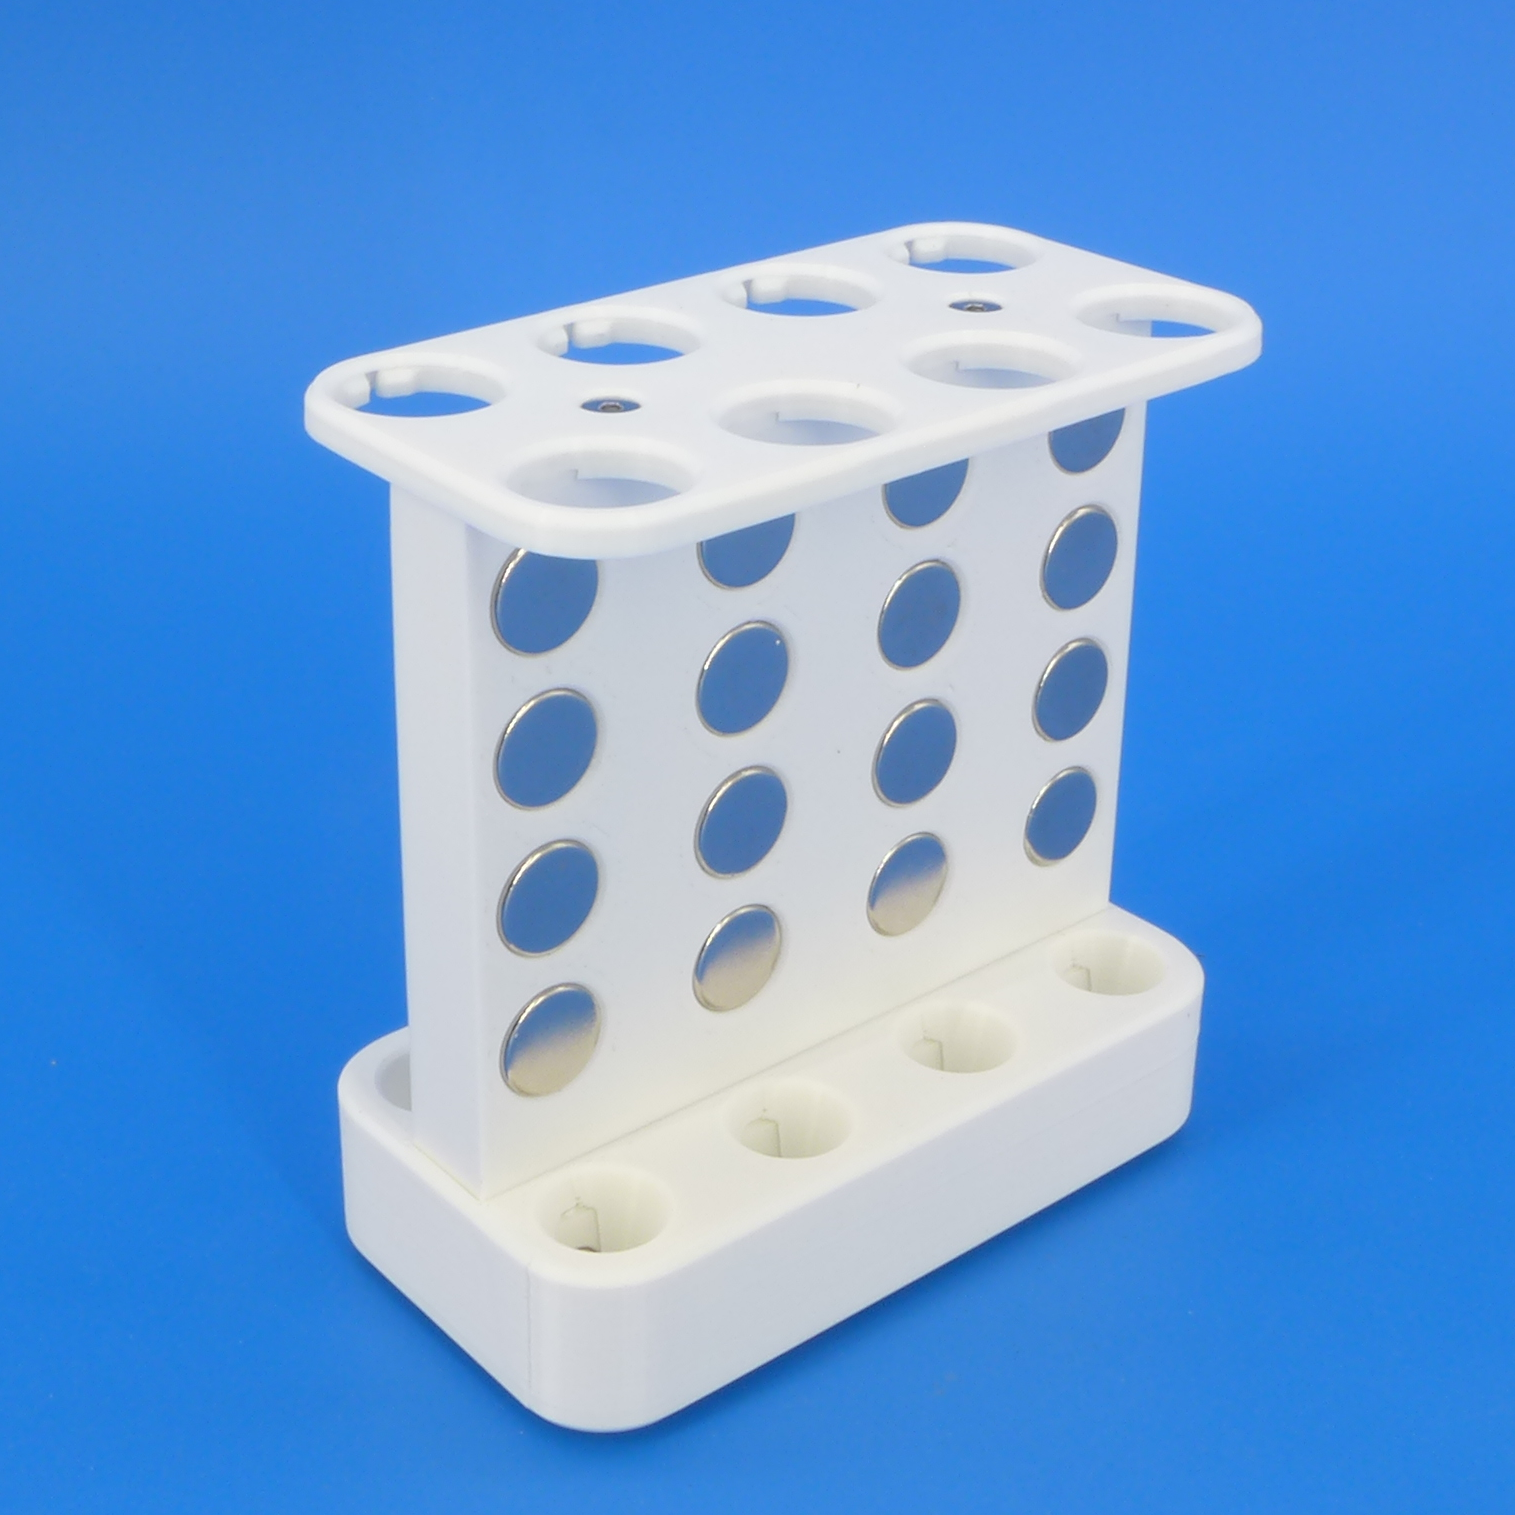 Magnetic rack for 15 mL tubes for DNA, RNA and other biomolecules purification